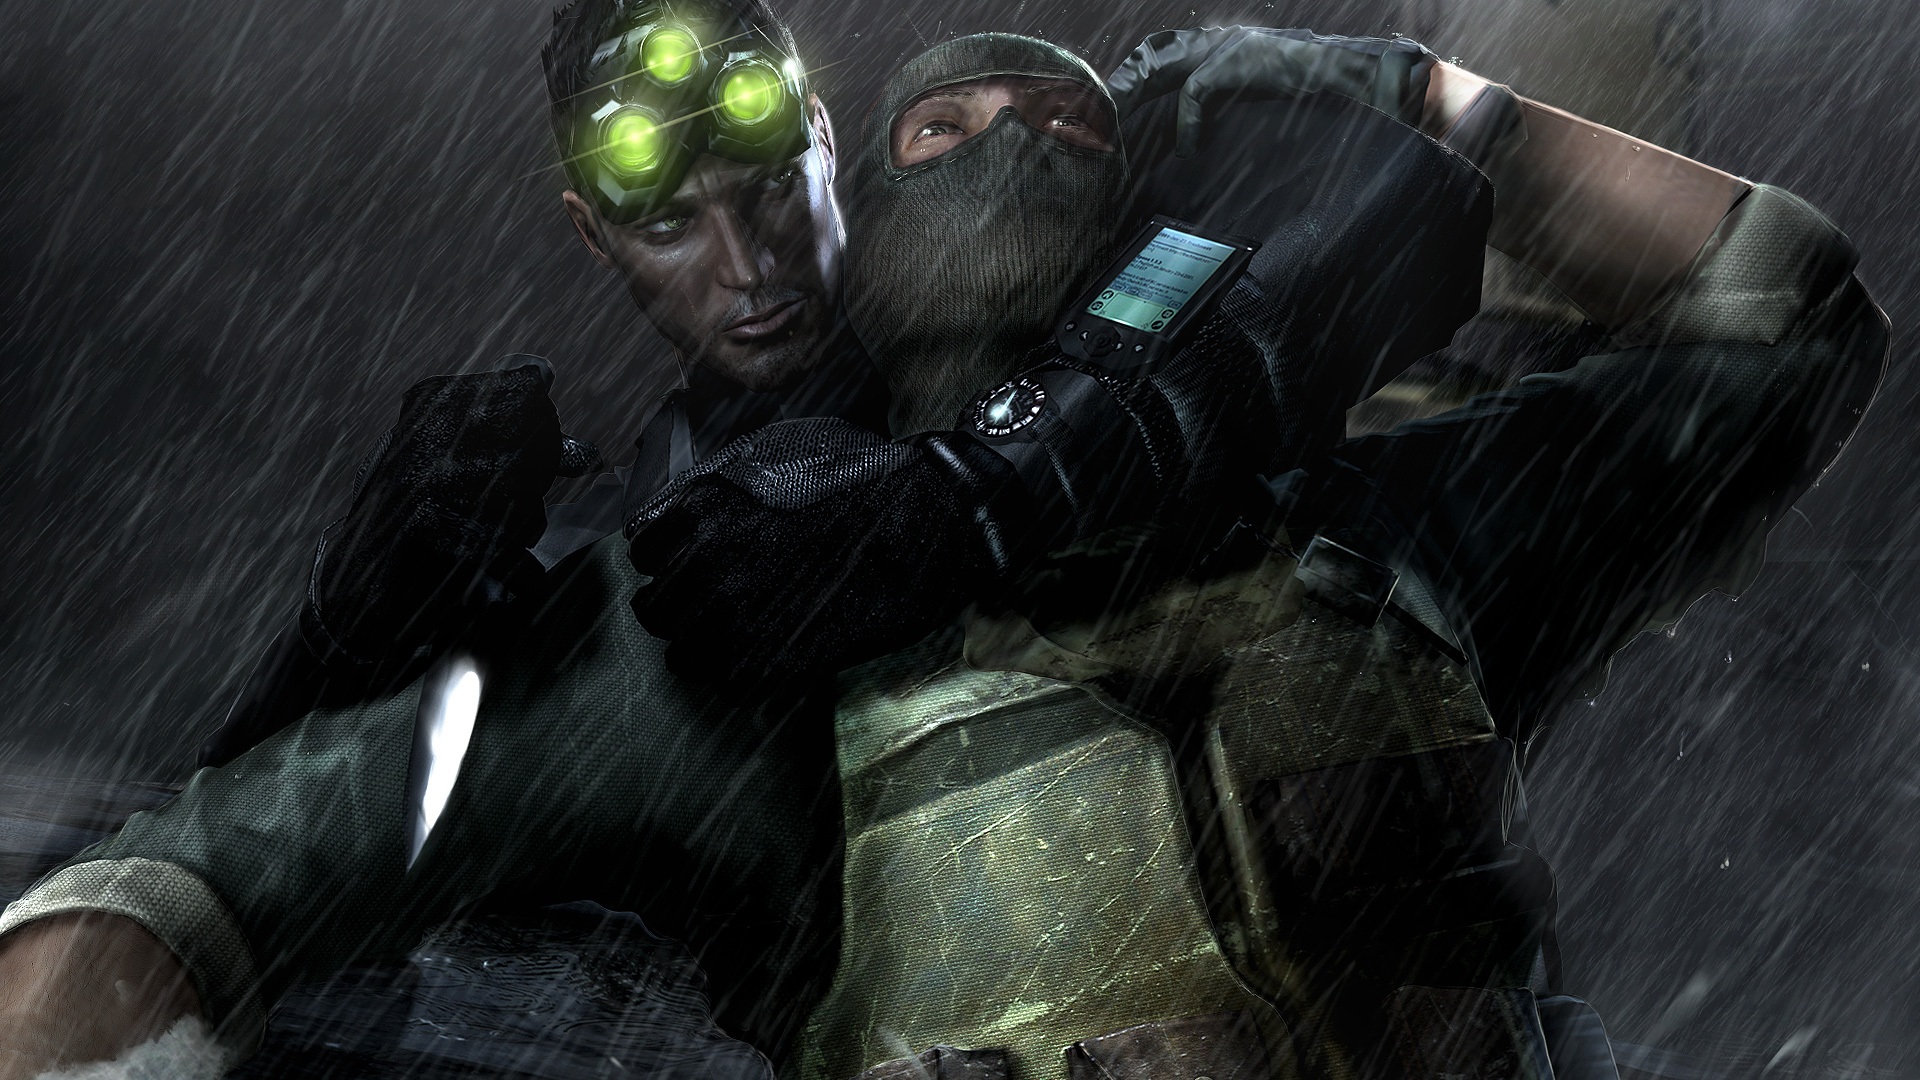 Tom Clancy's Splinter Cell Chaos Theory First Look - GameSpot